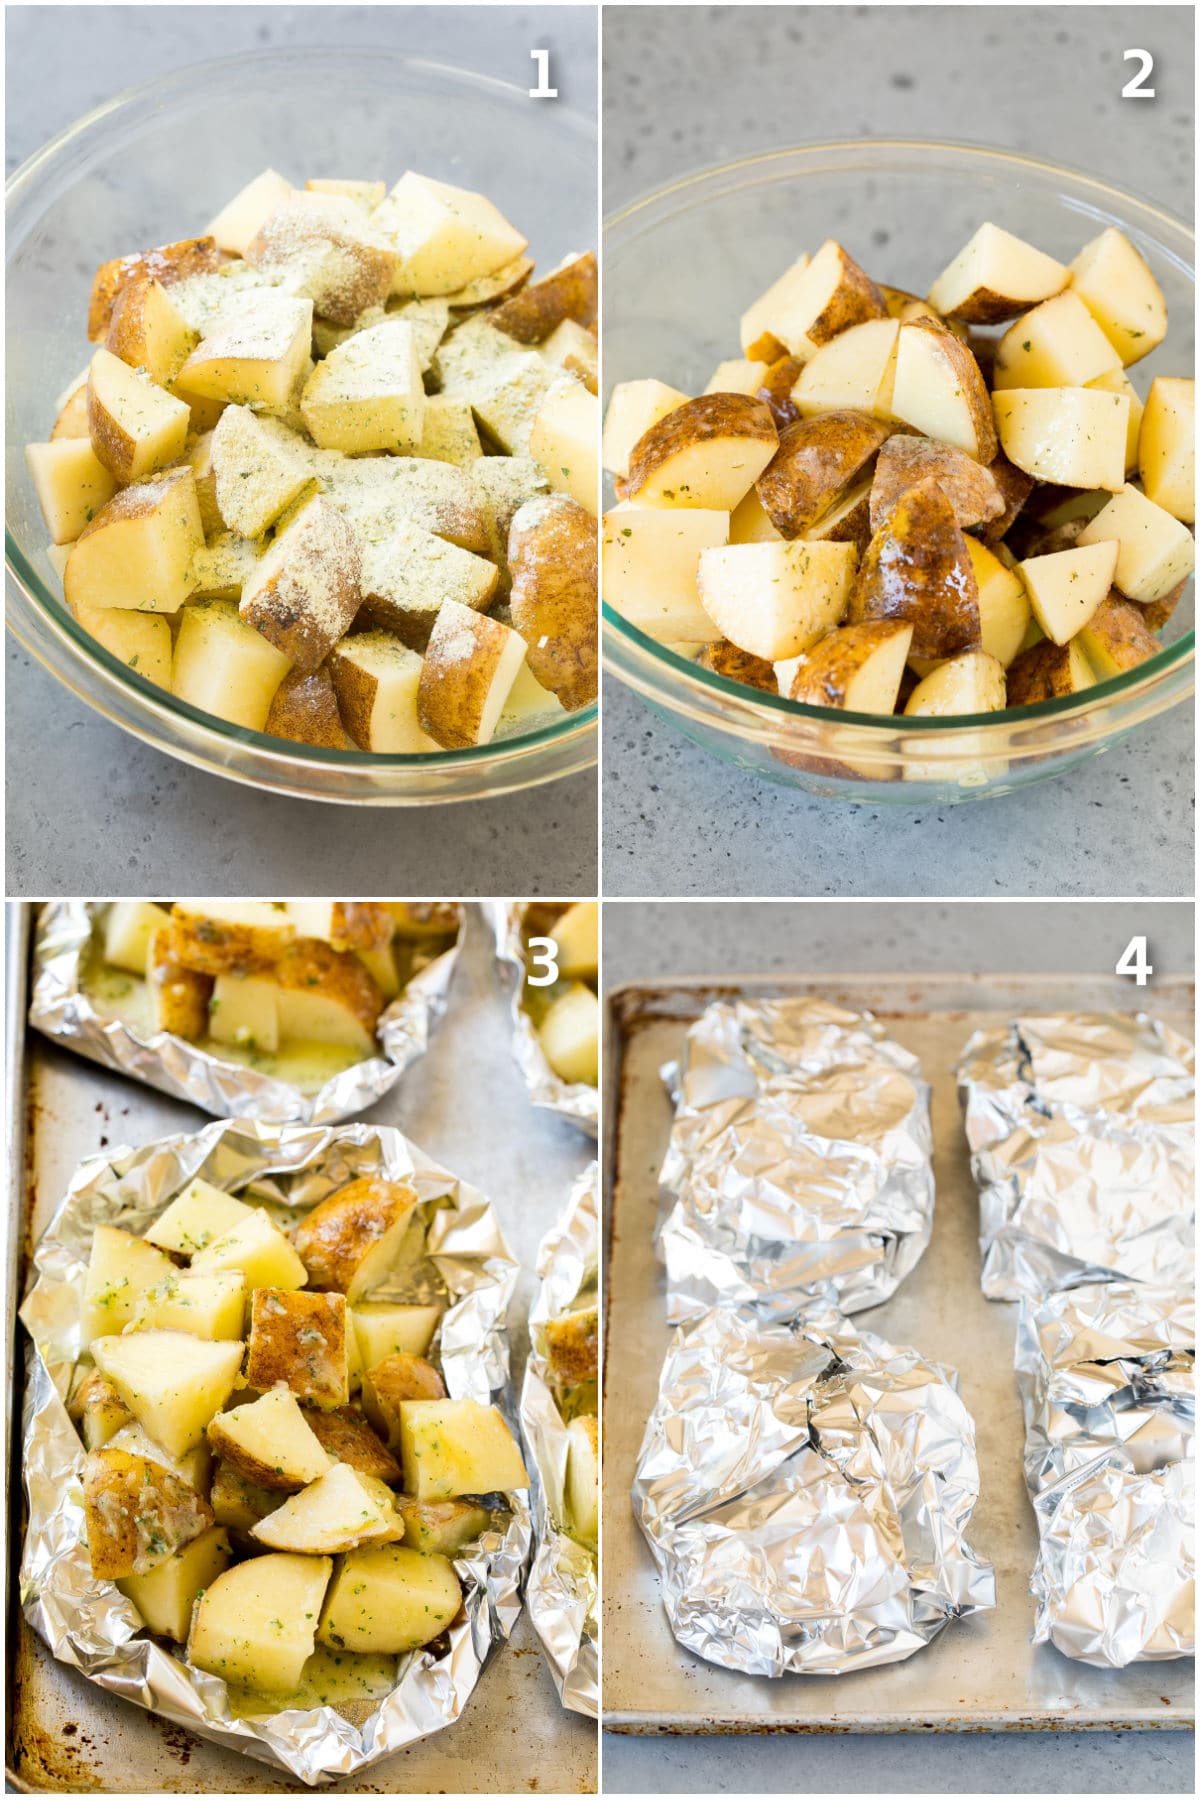 Step by step process shots showing how to grill potatoes in foil packets.